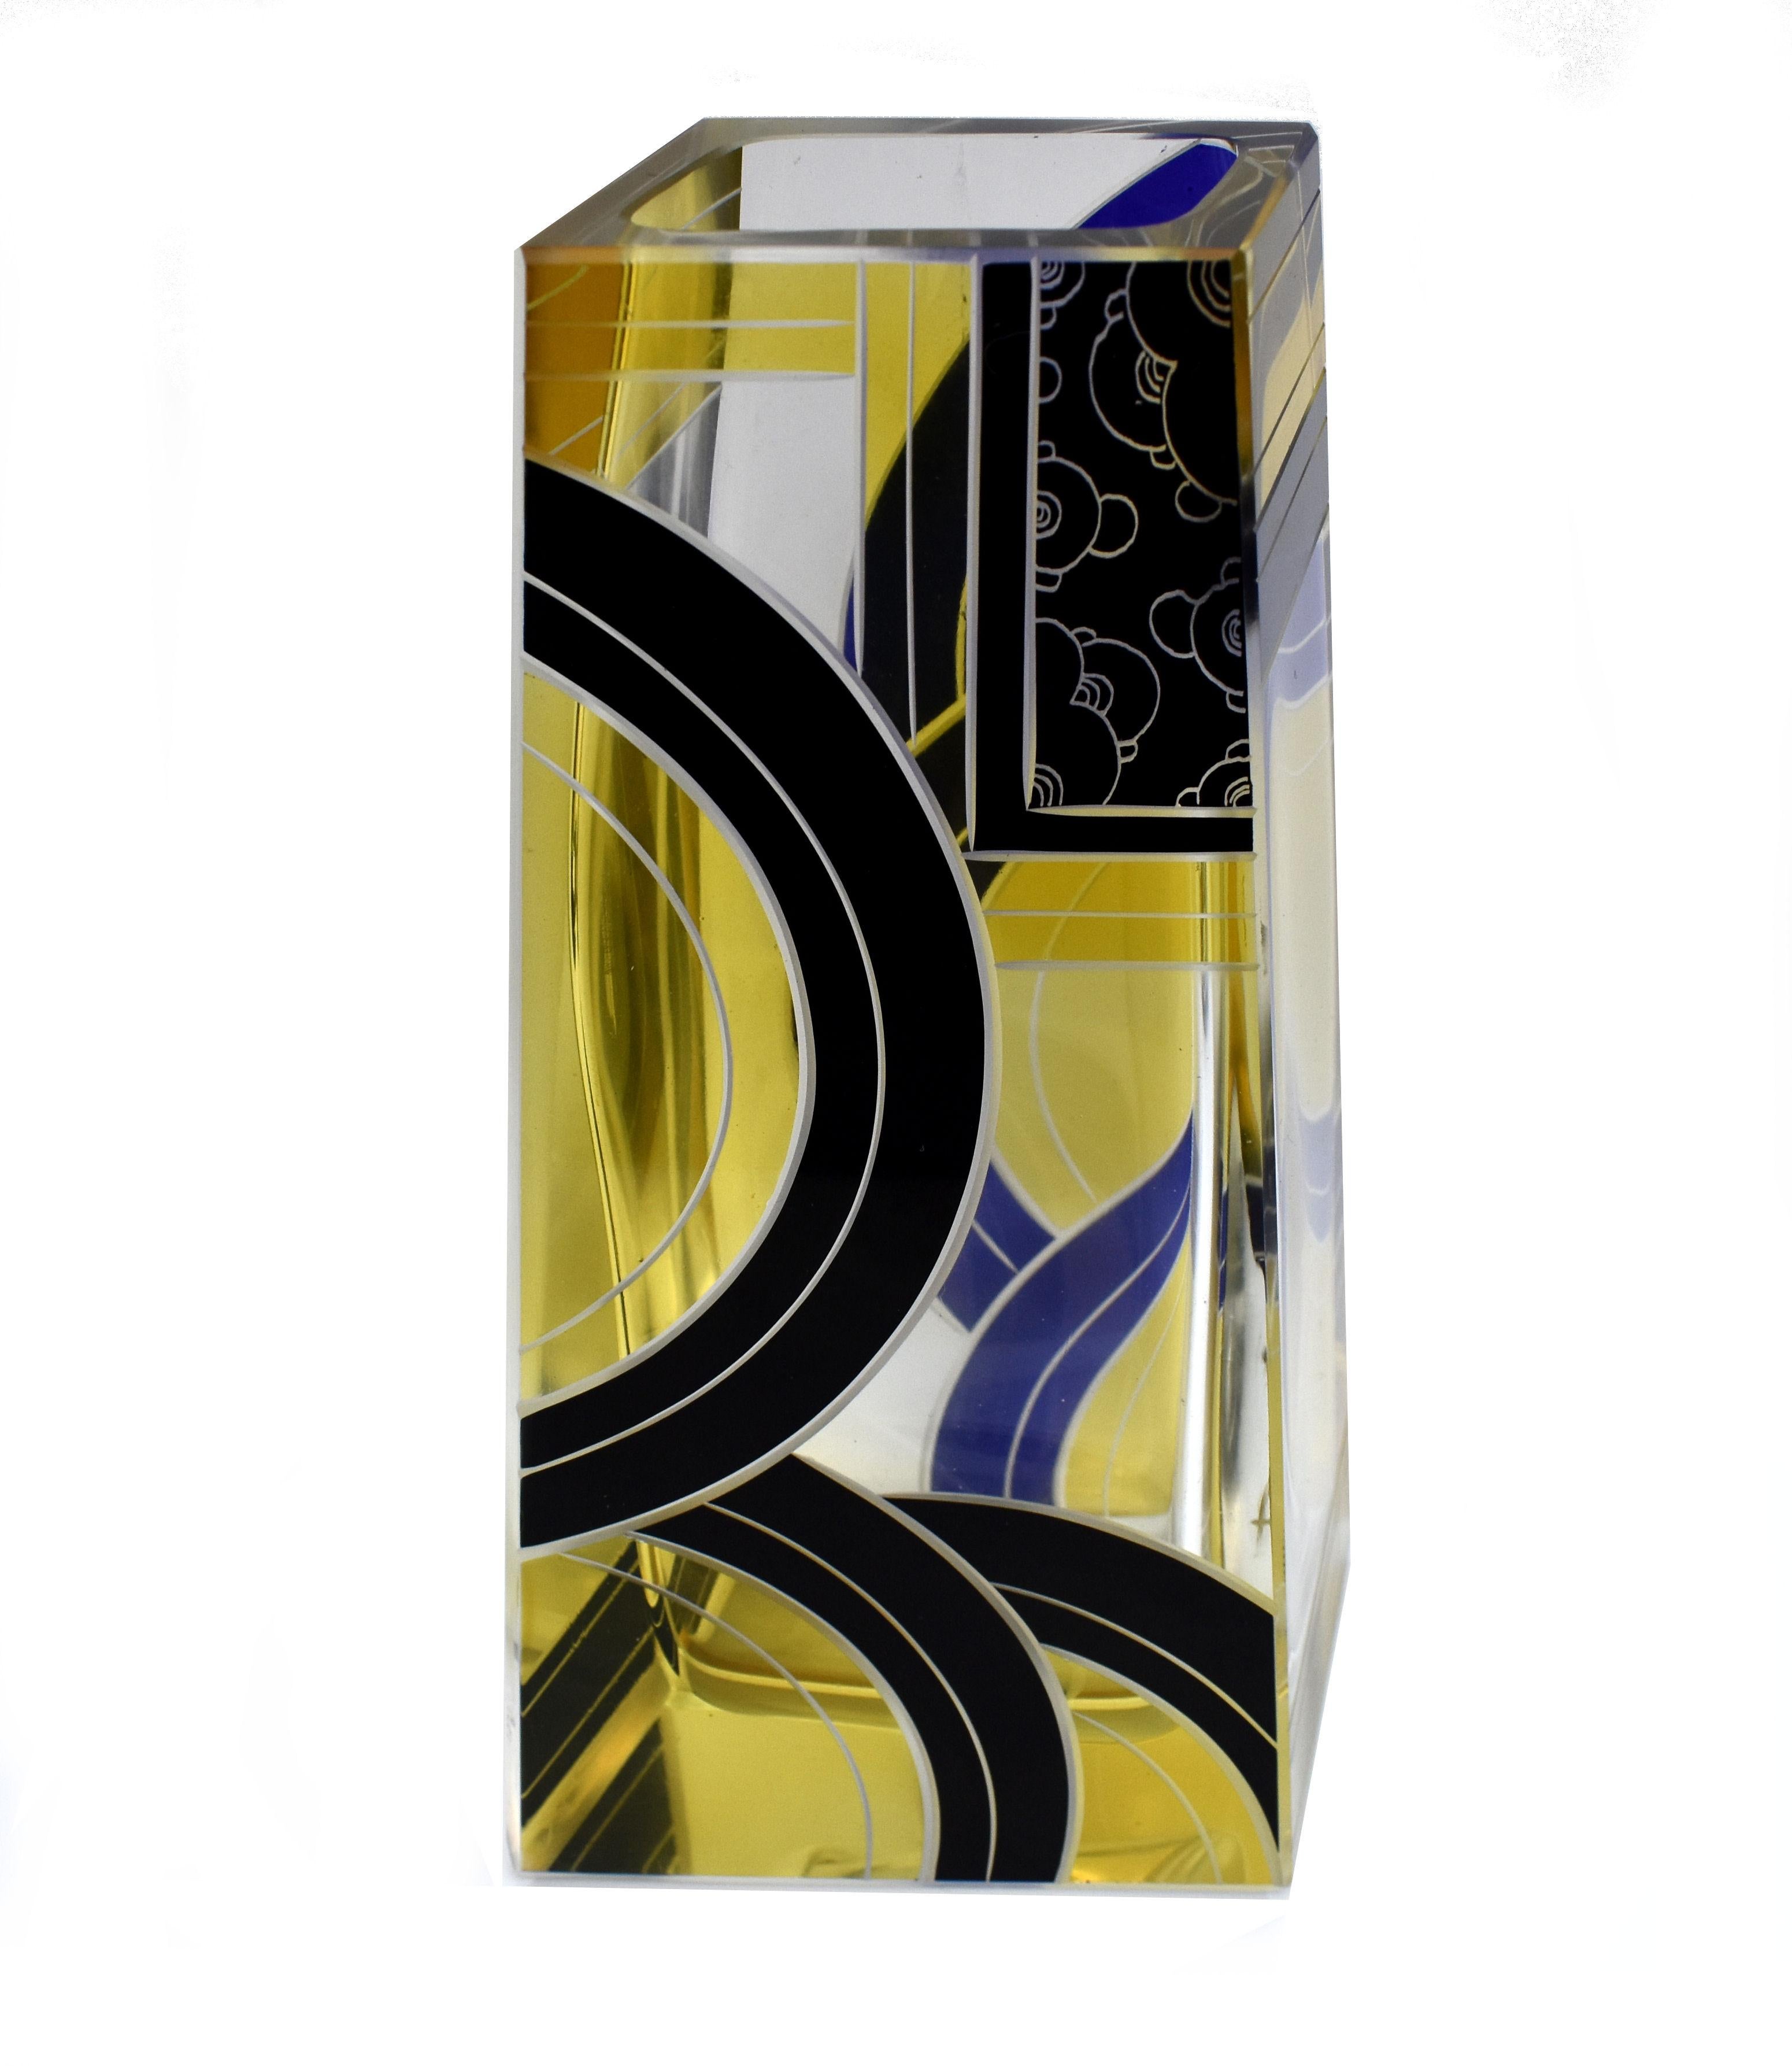 20th Century Art Deco Tall Glass & Enamel Etched Vase By Karl Palda, Czech Republic, C1930 For Sale